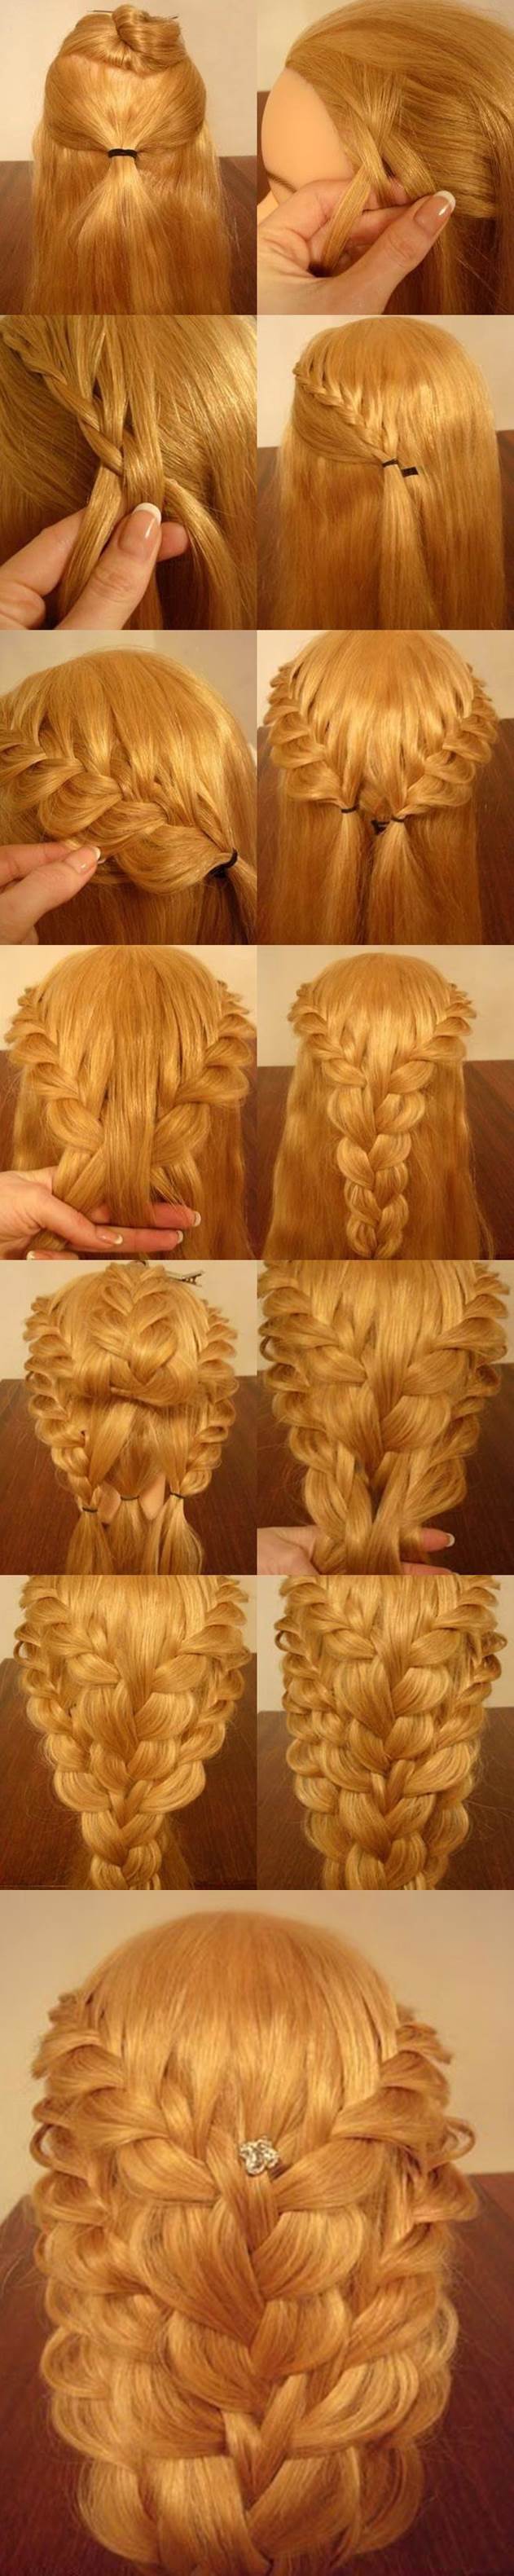 DIY Delicate Braided Hairstyle 2